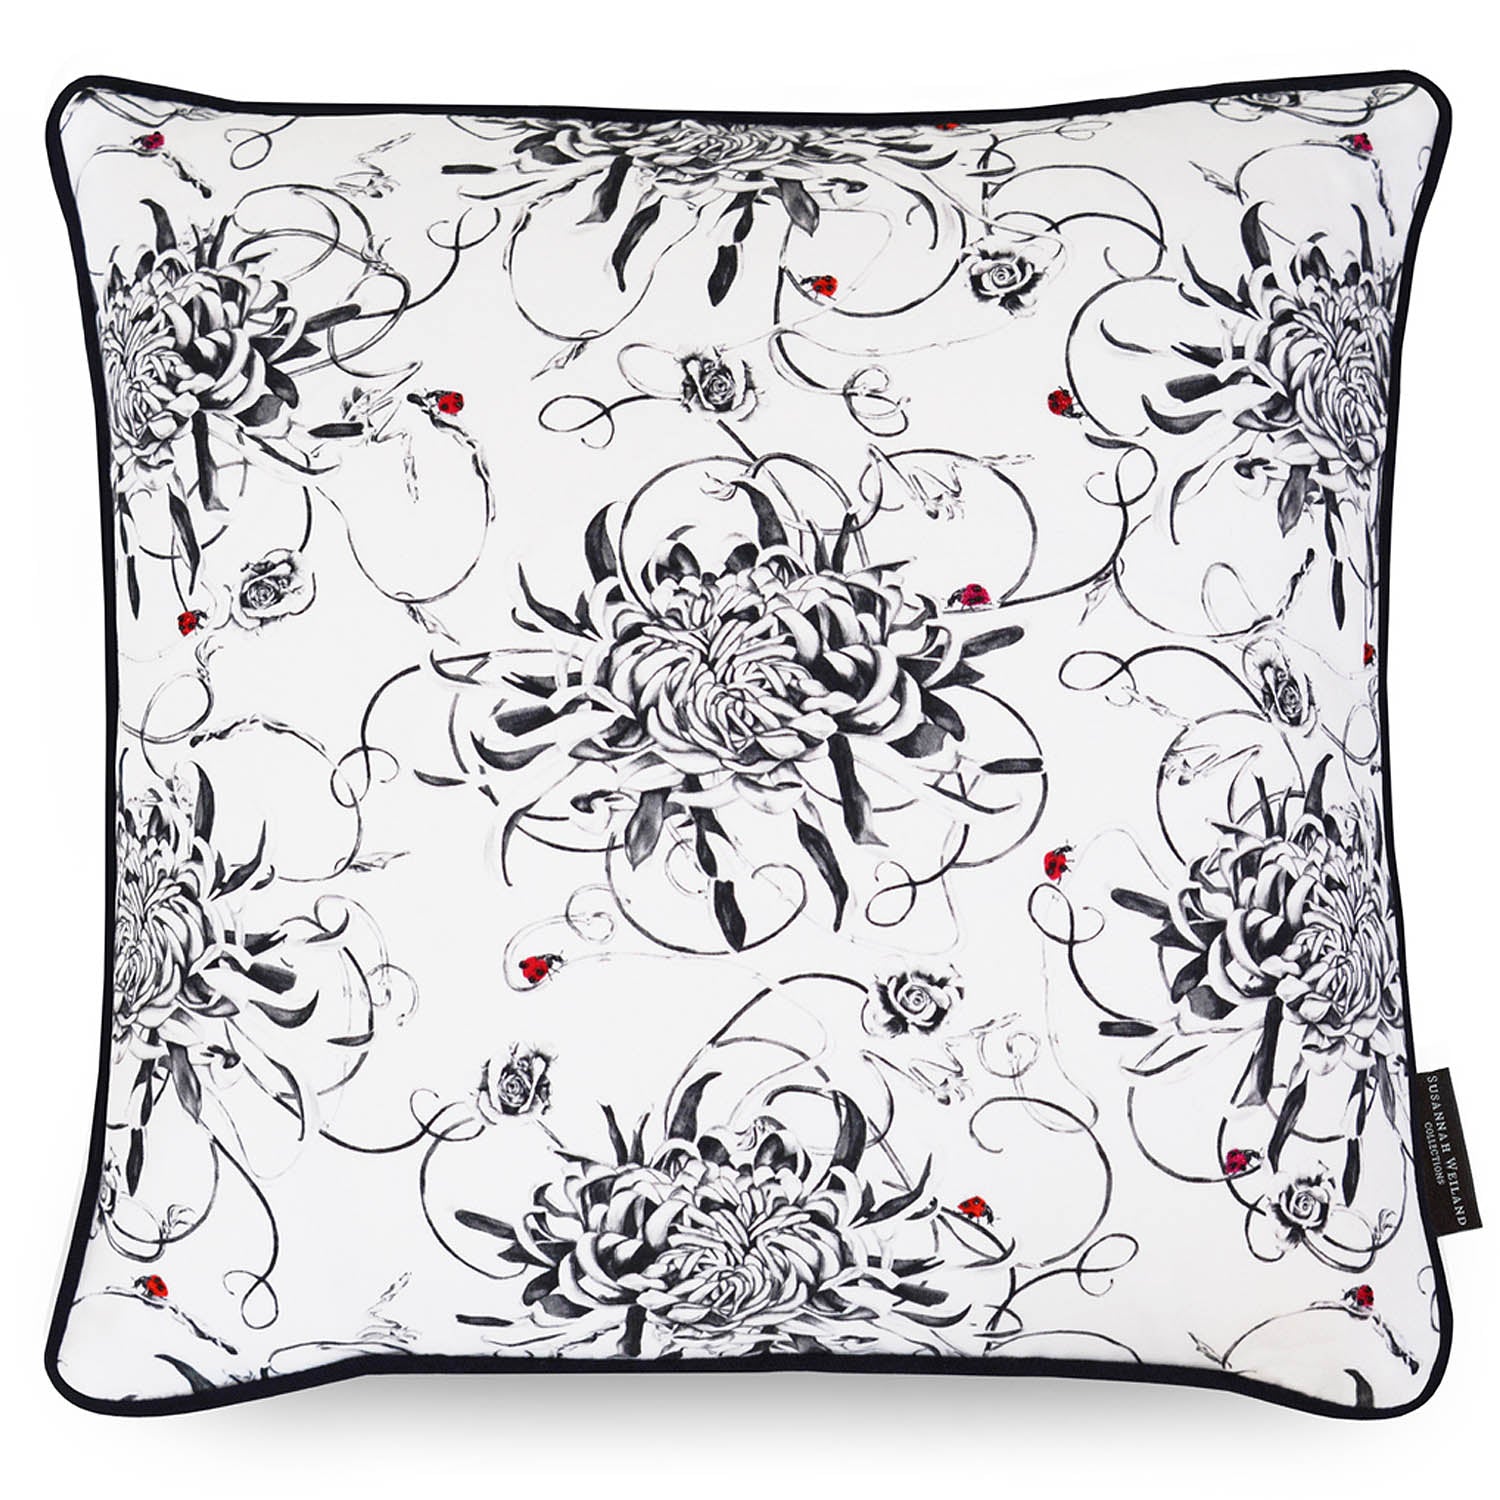 Monochrome floral medium square cushion with hand embroidered ladybirds 